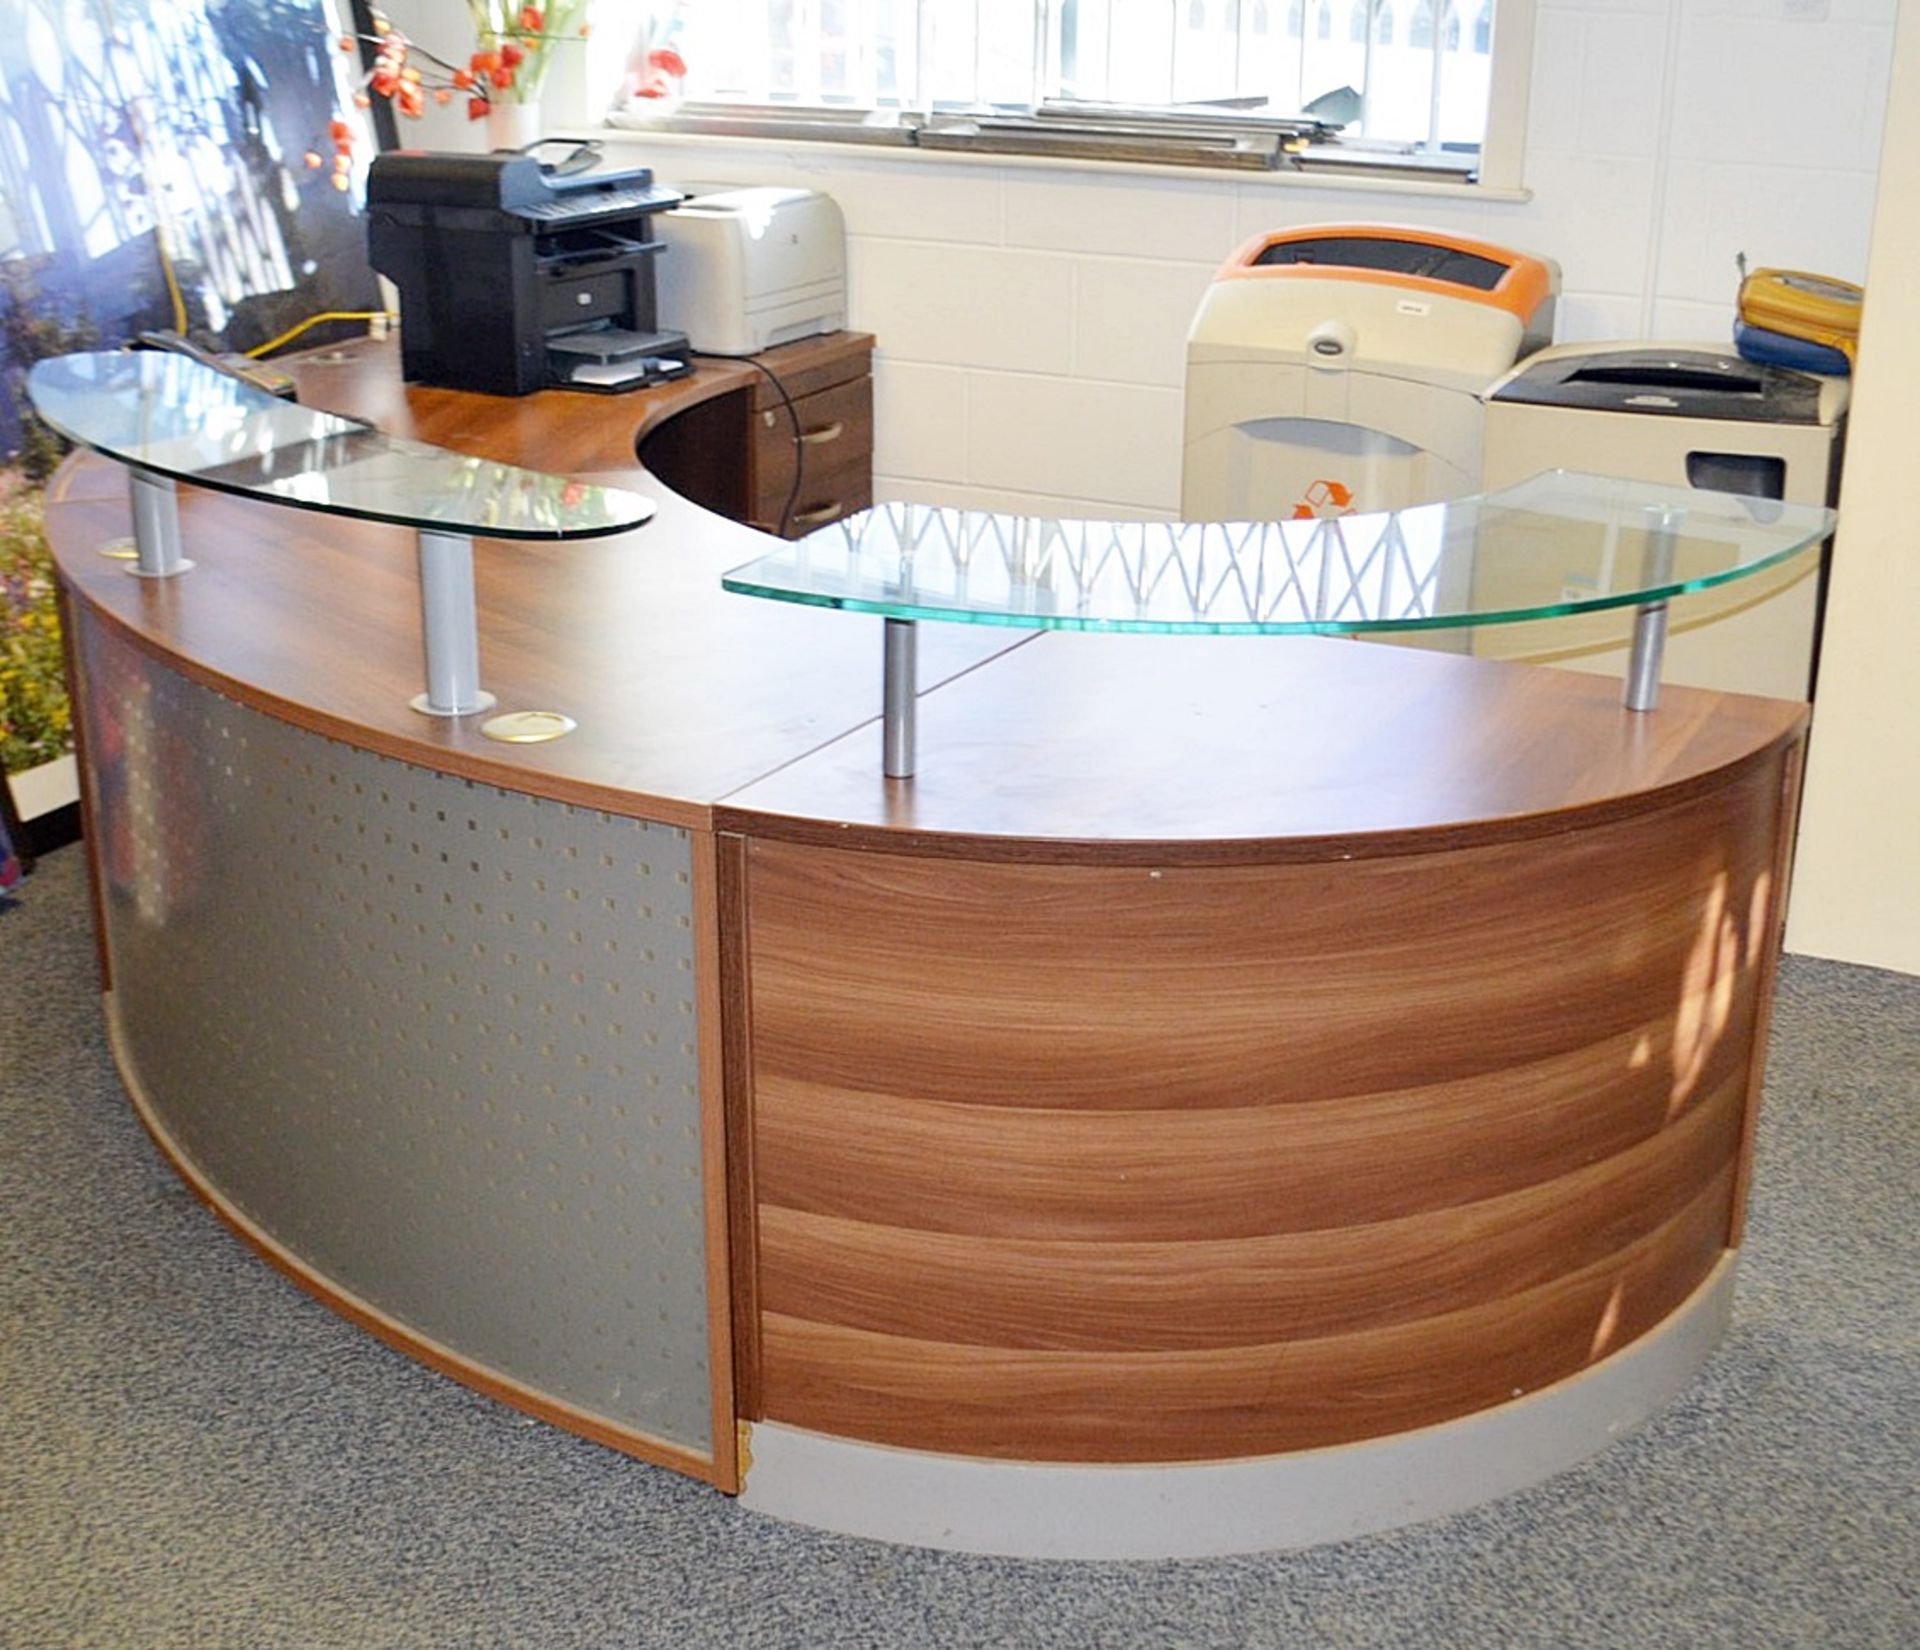 1 x Curved 3-Metre Wide Executive Reception Desk - Recently Removed From A Working Office